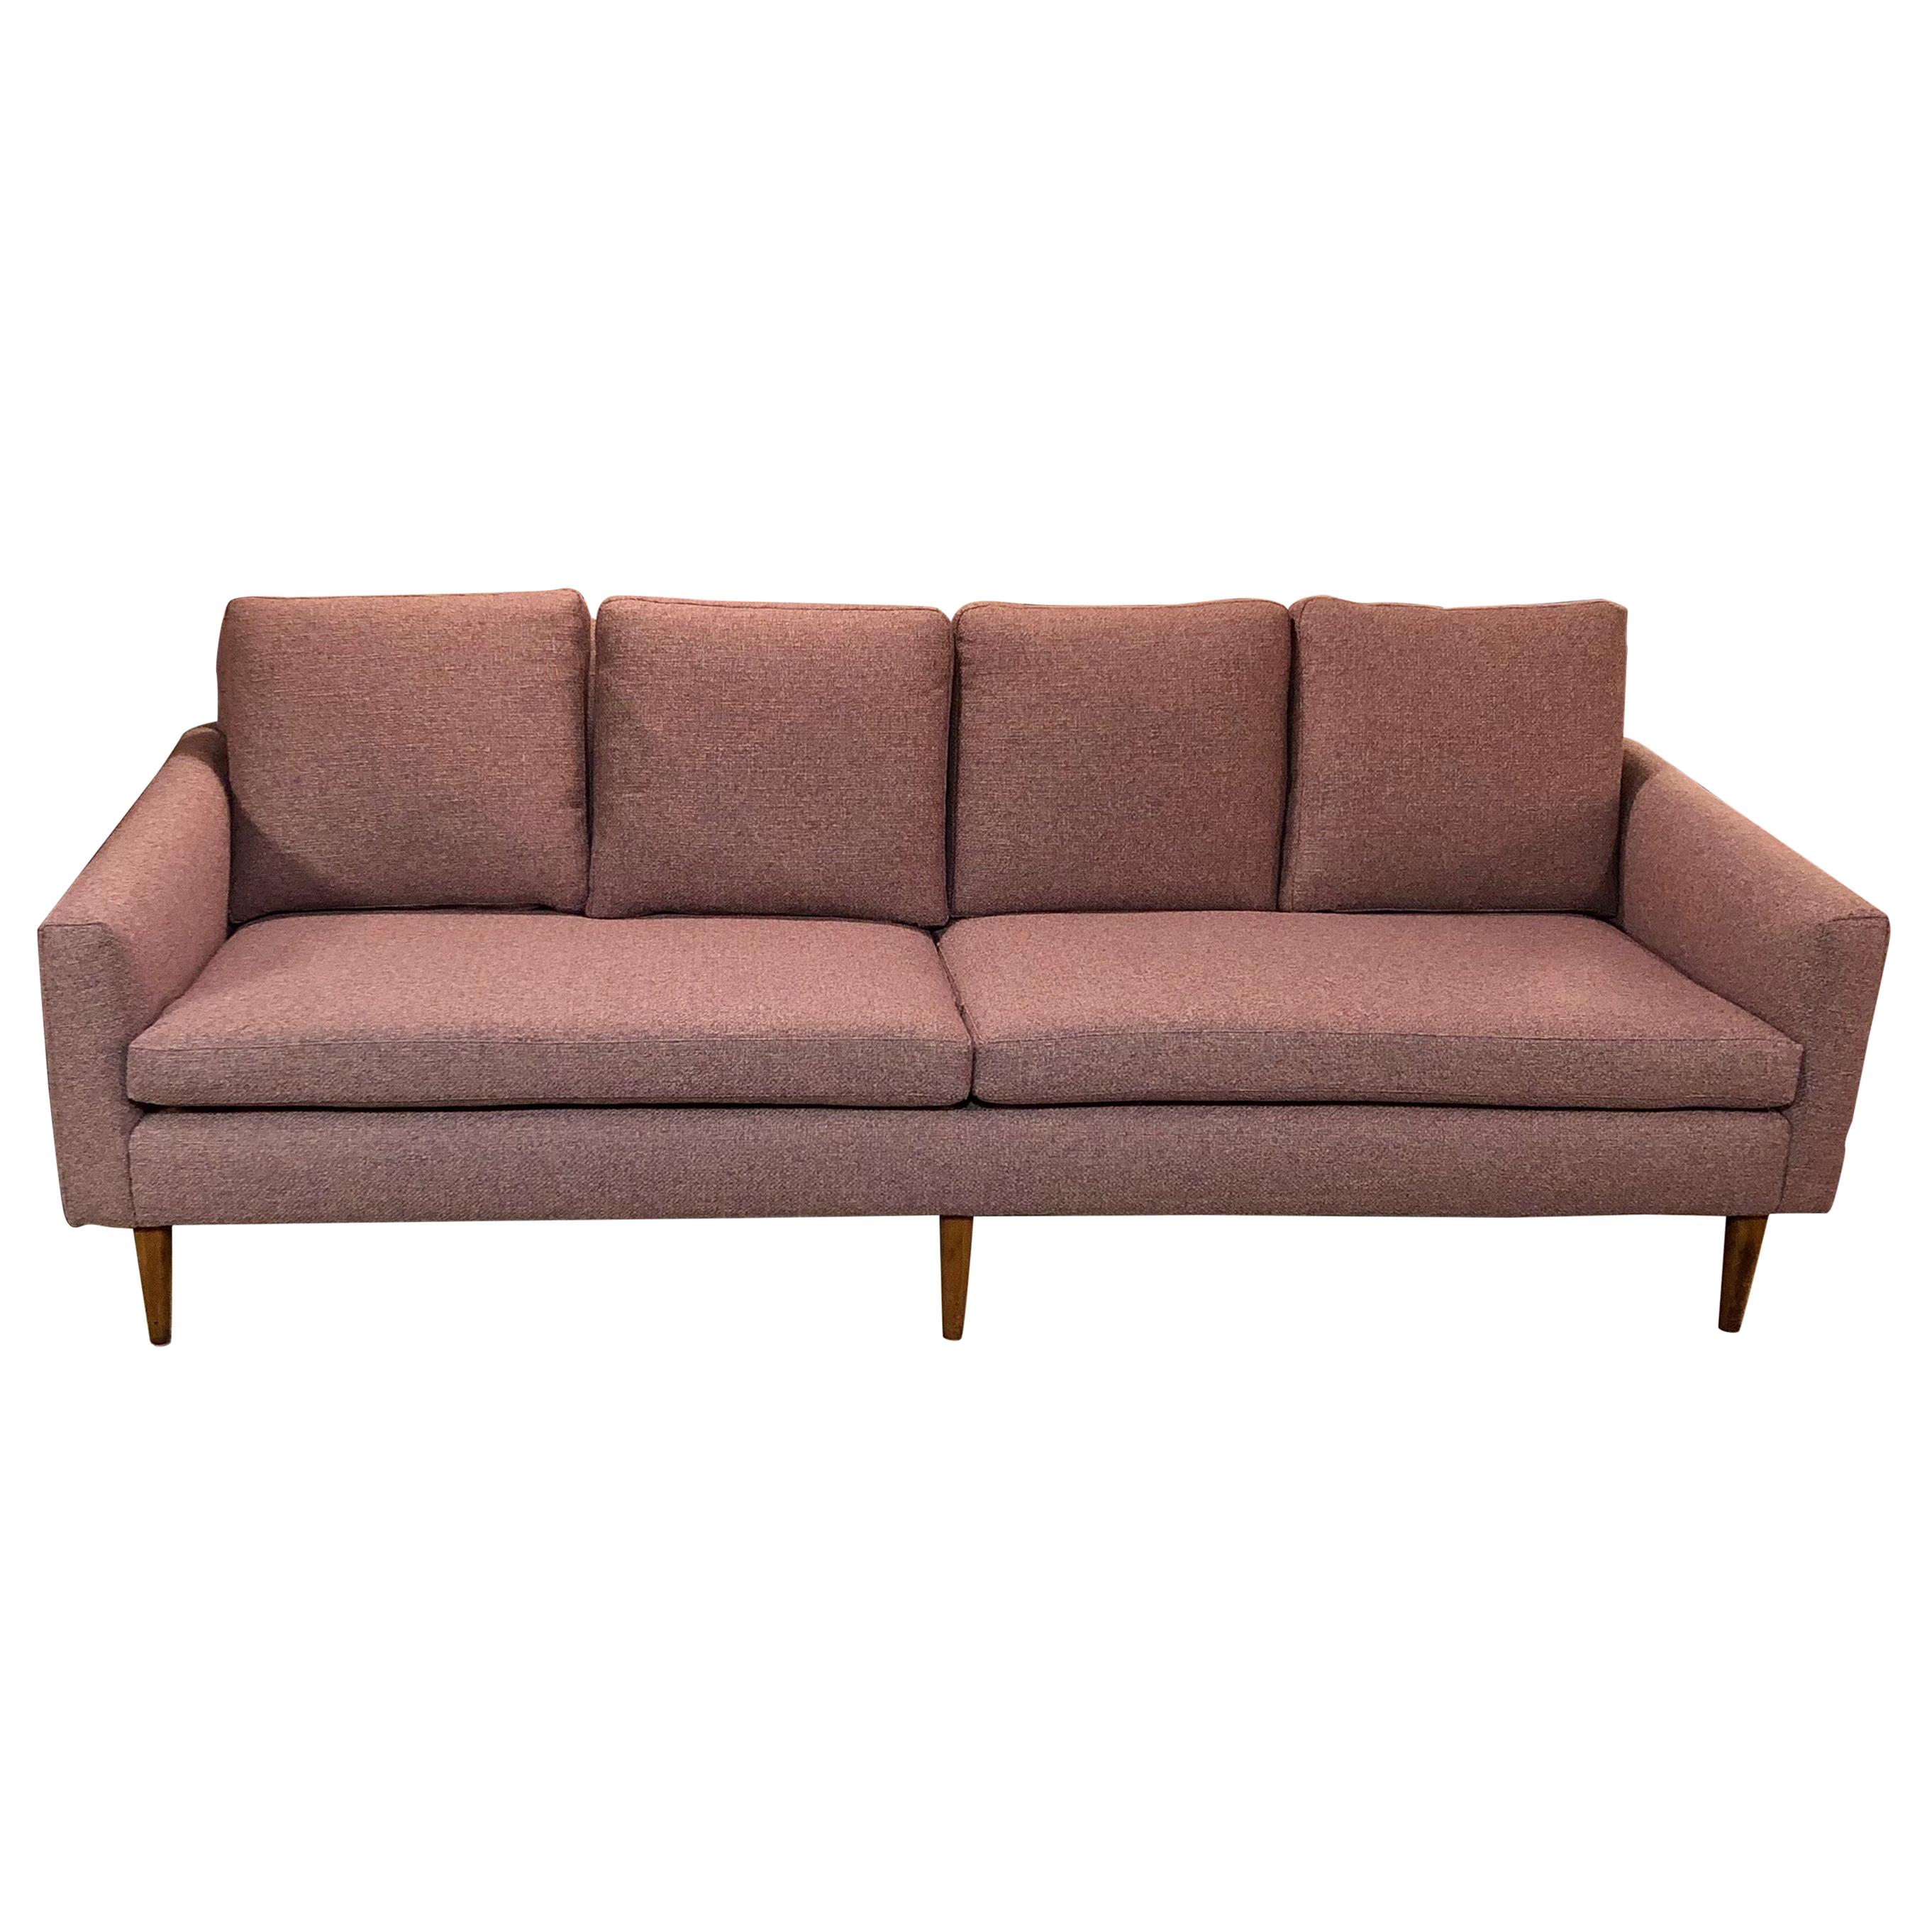 Vintage 1960s Lavender 4-Seat Sofa by Paul McCobb for Directional